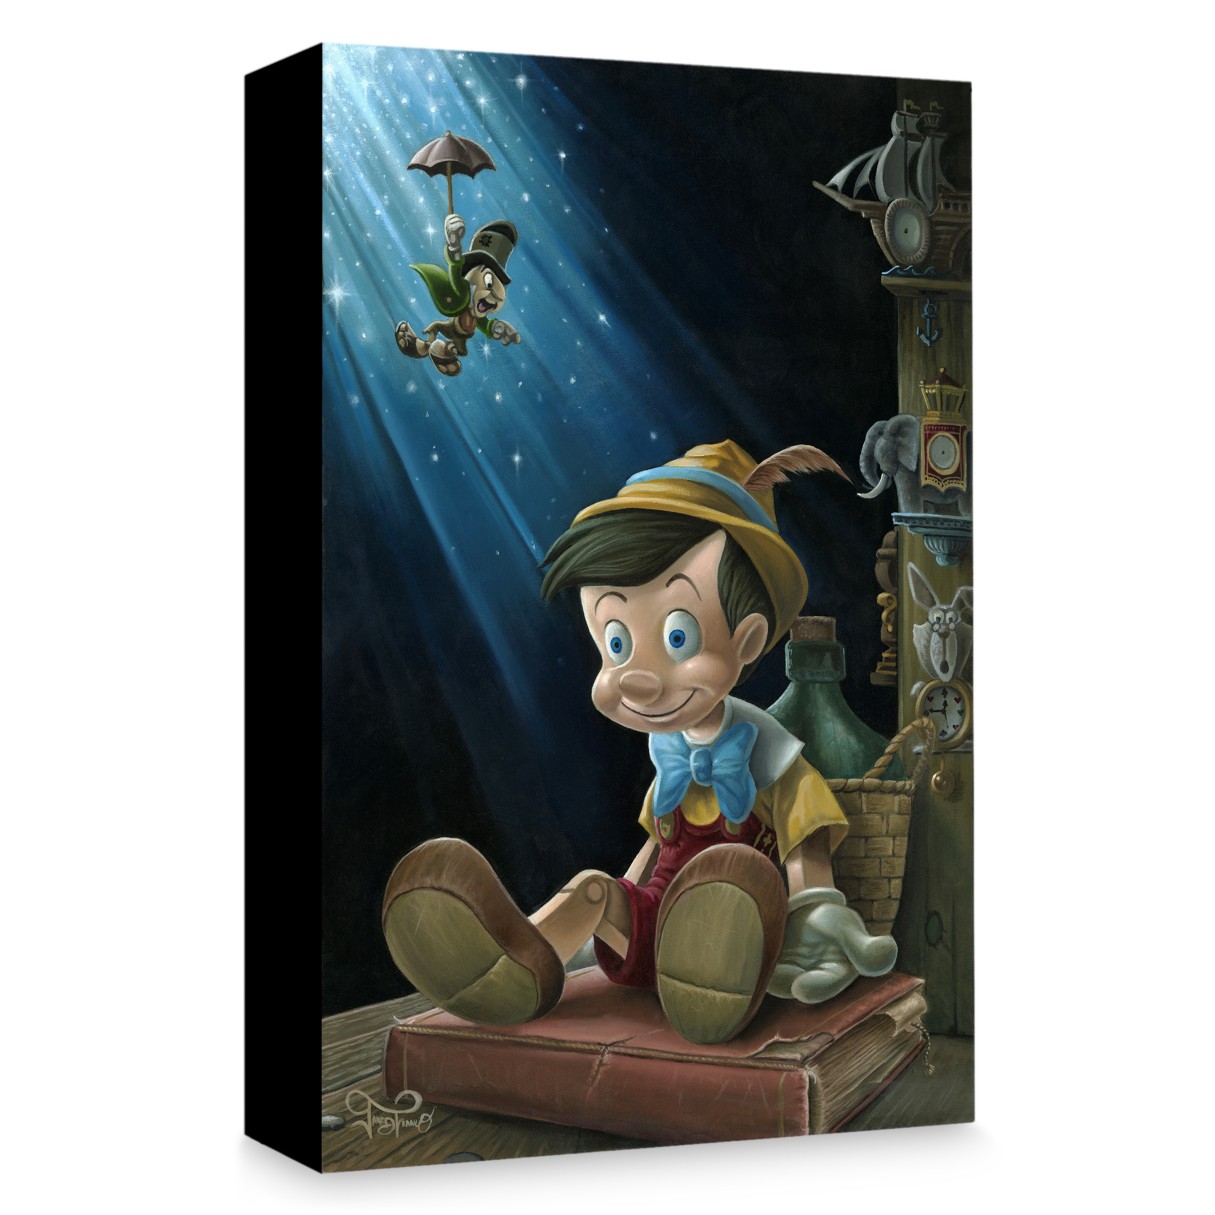 Pinocchio ''The Little Wooden Boy'' Giclée on Canvas by Jared Franco